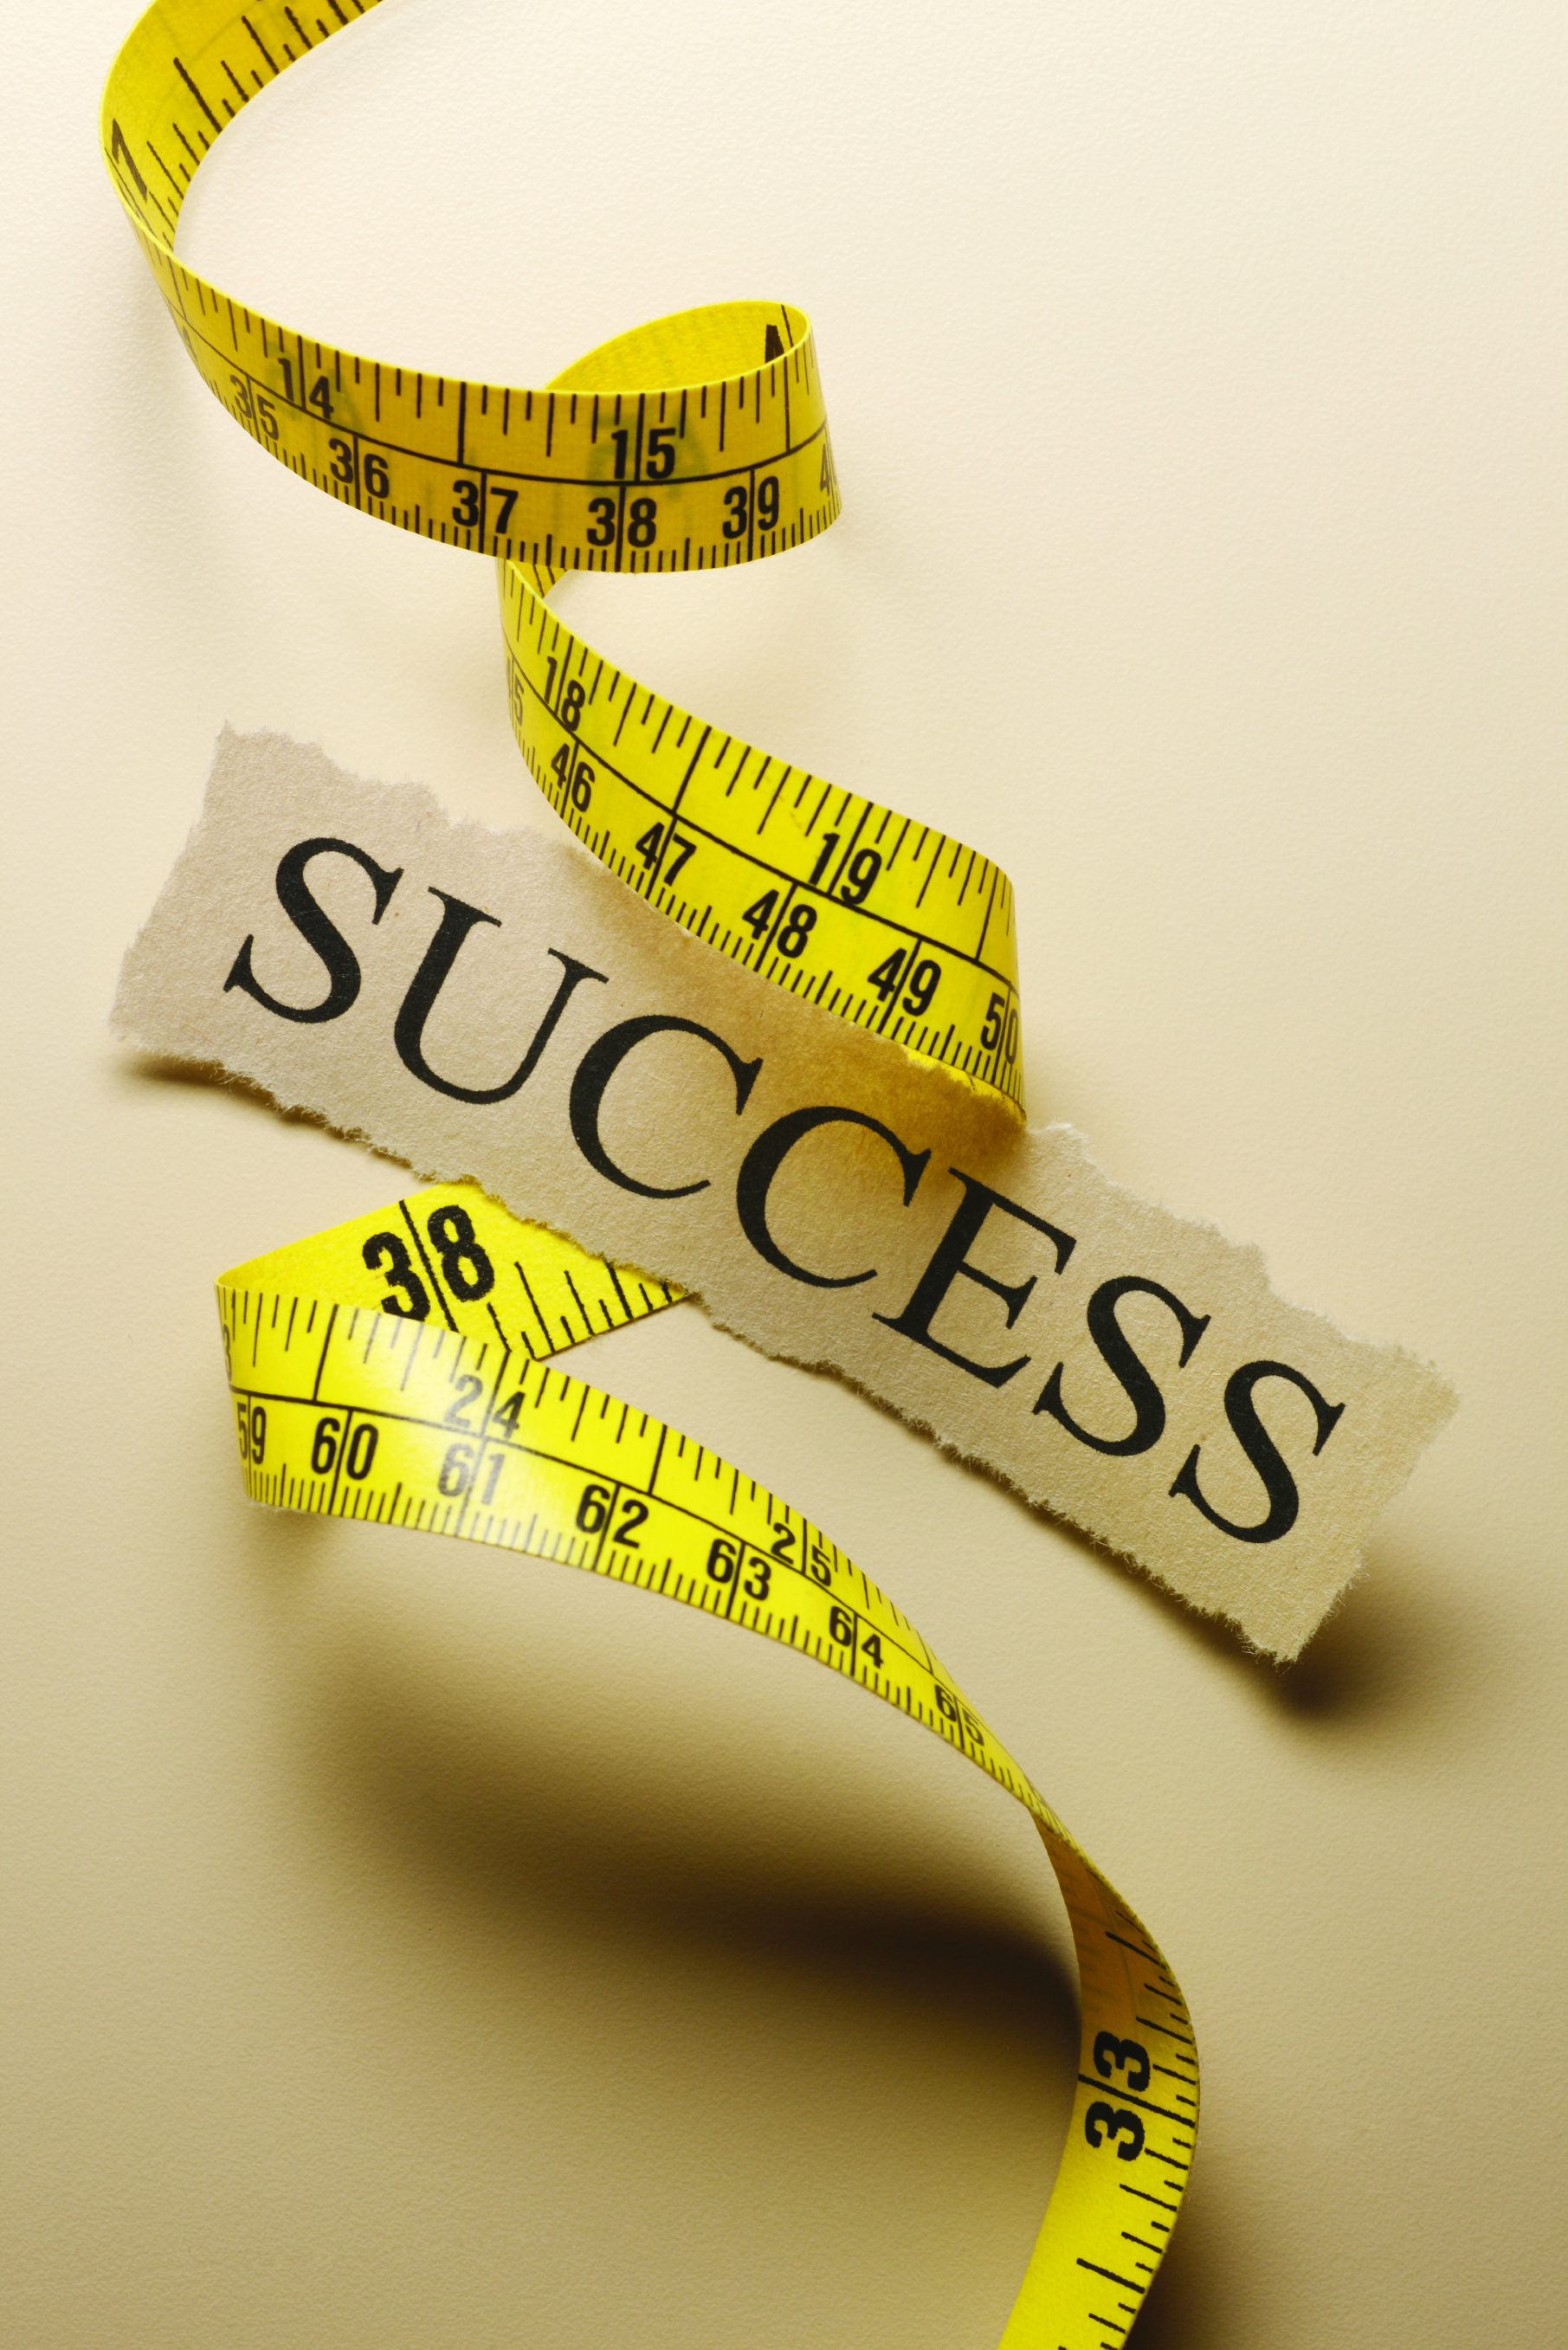 How Do You Measure Success? - Convertible Solutions